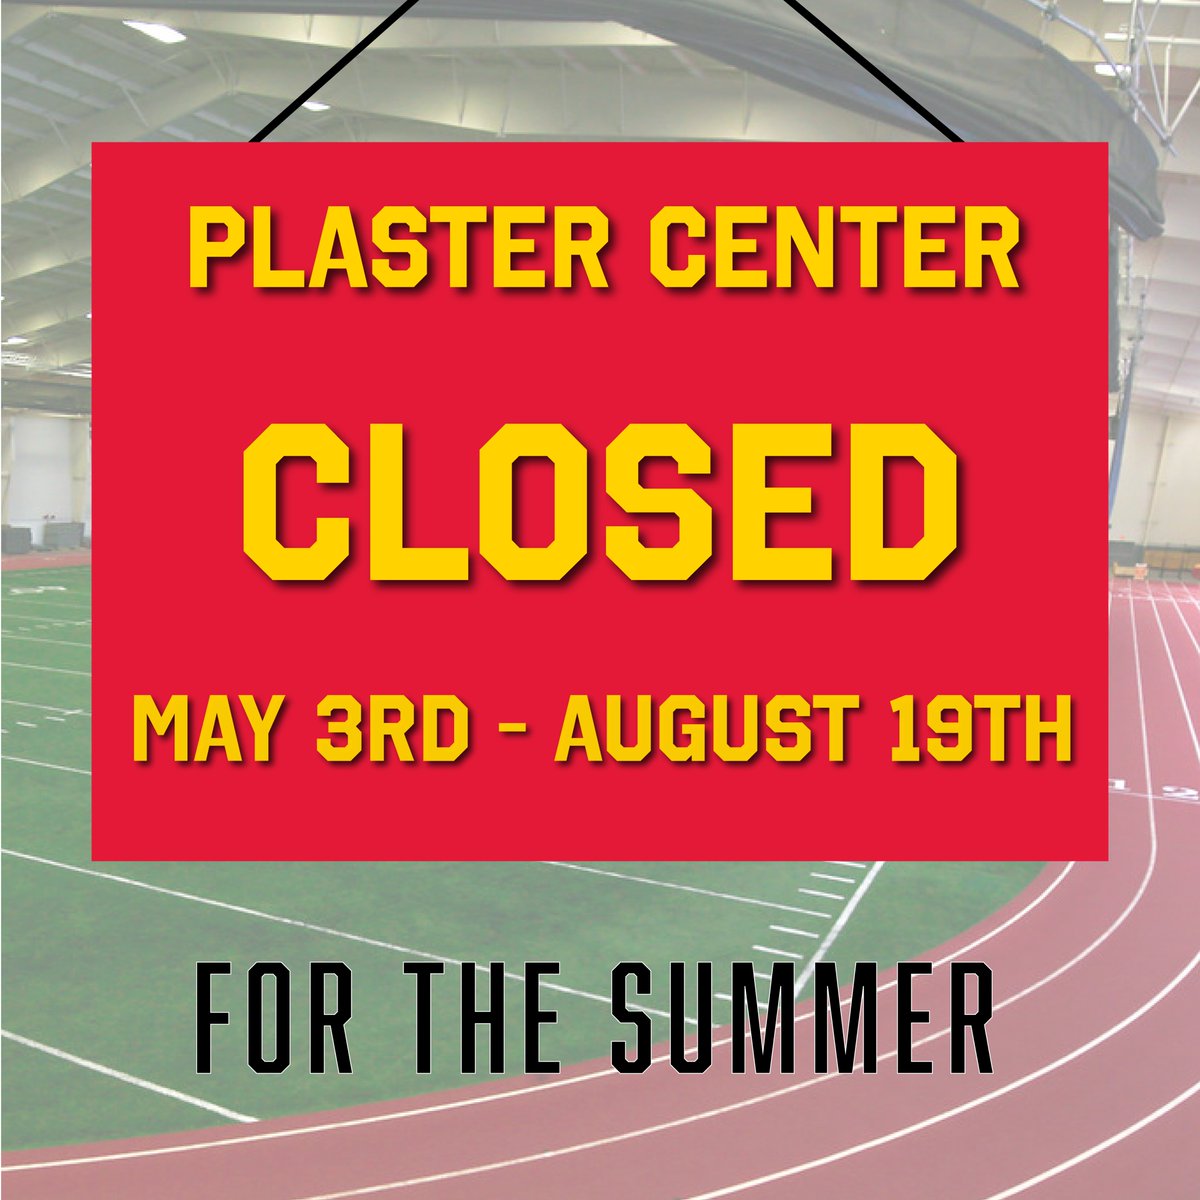 🚨 LAST DAY OPEN FOR PLASTER CENTER 🚨 Today is the last day that the Plaster Center will be open until next semester. The Plaster Center will be closed from tomorrow (May 3rd) until school resumes in the fall. #campusrec #campuslife #OAGAAG #PSU